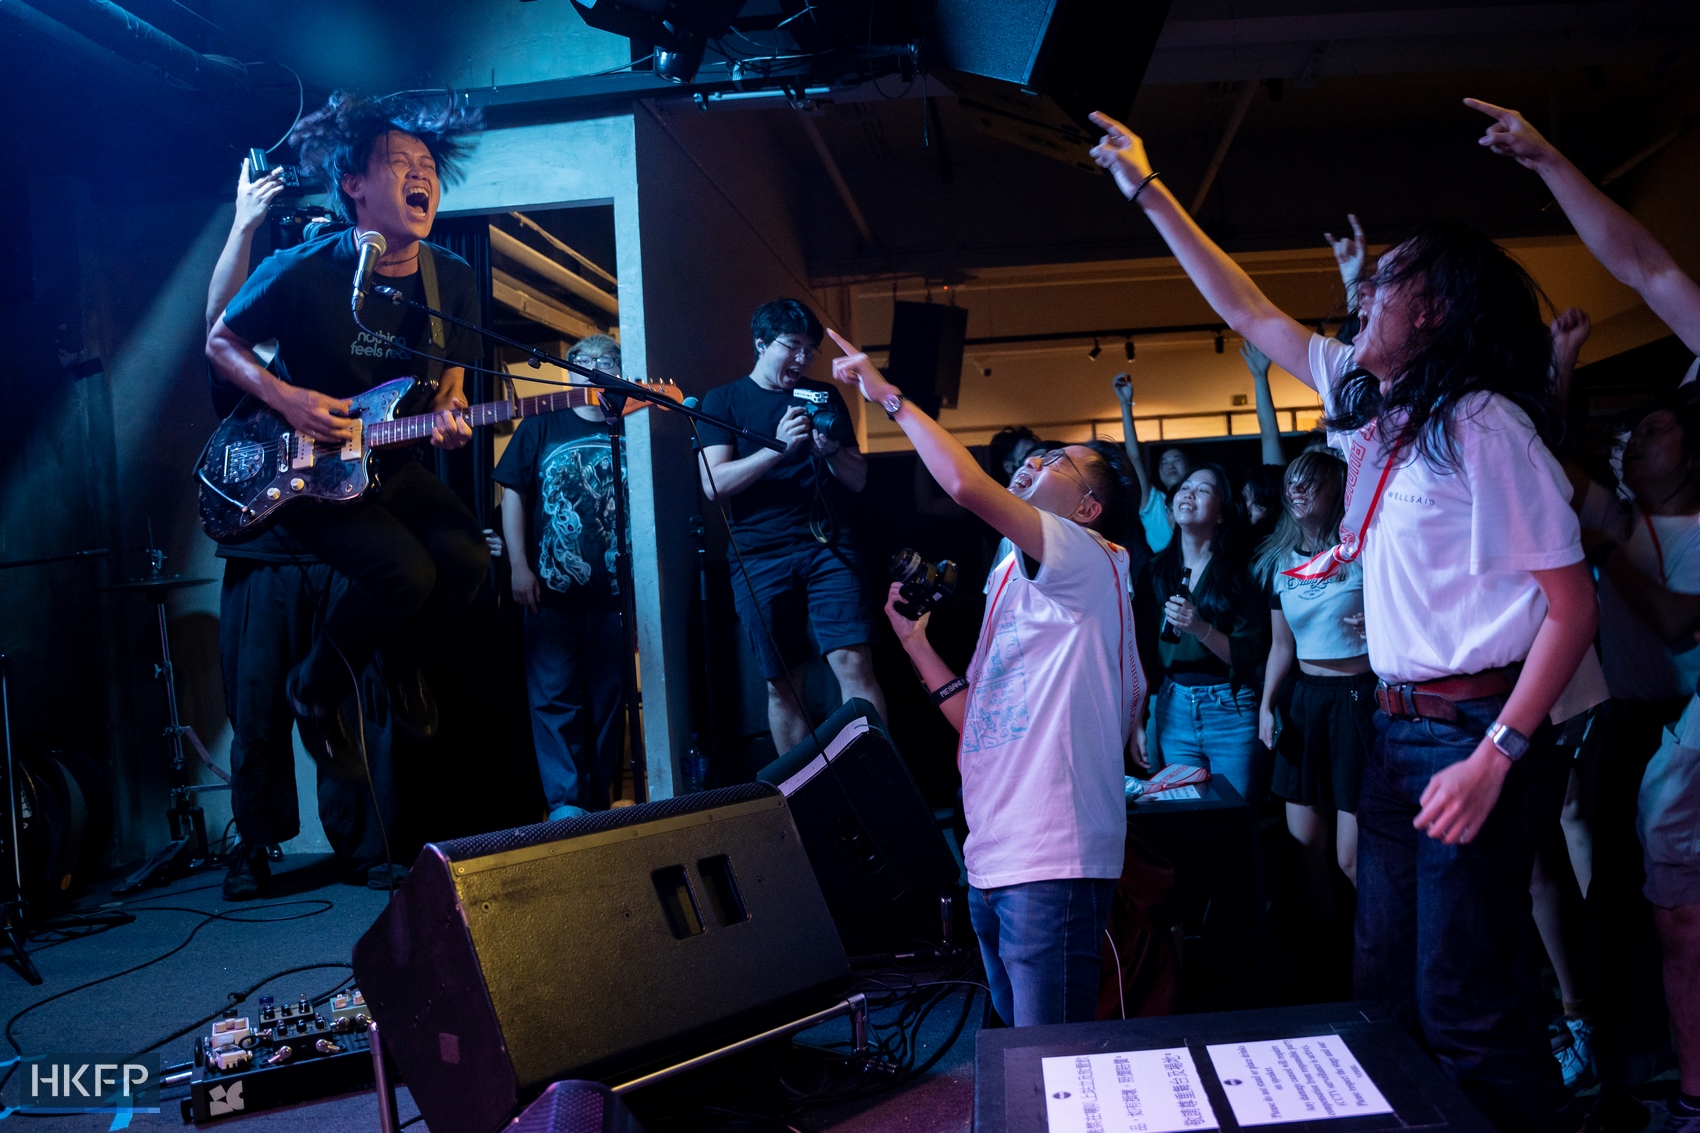 Sum Lok-kei and his band Wellsaid play in a live show in Hong Kong. Photo: Kyle Lam/HKFP.